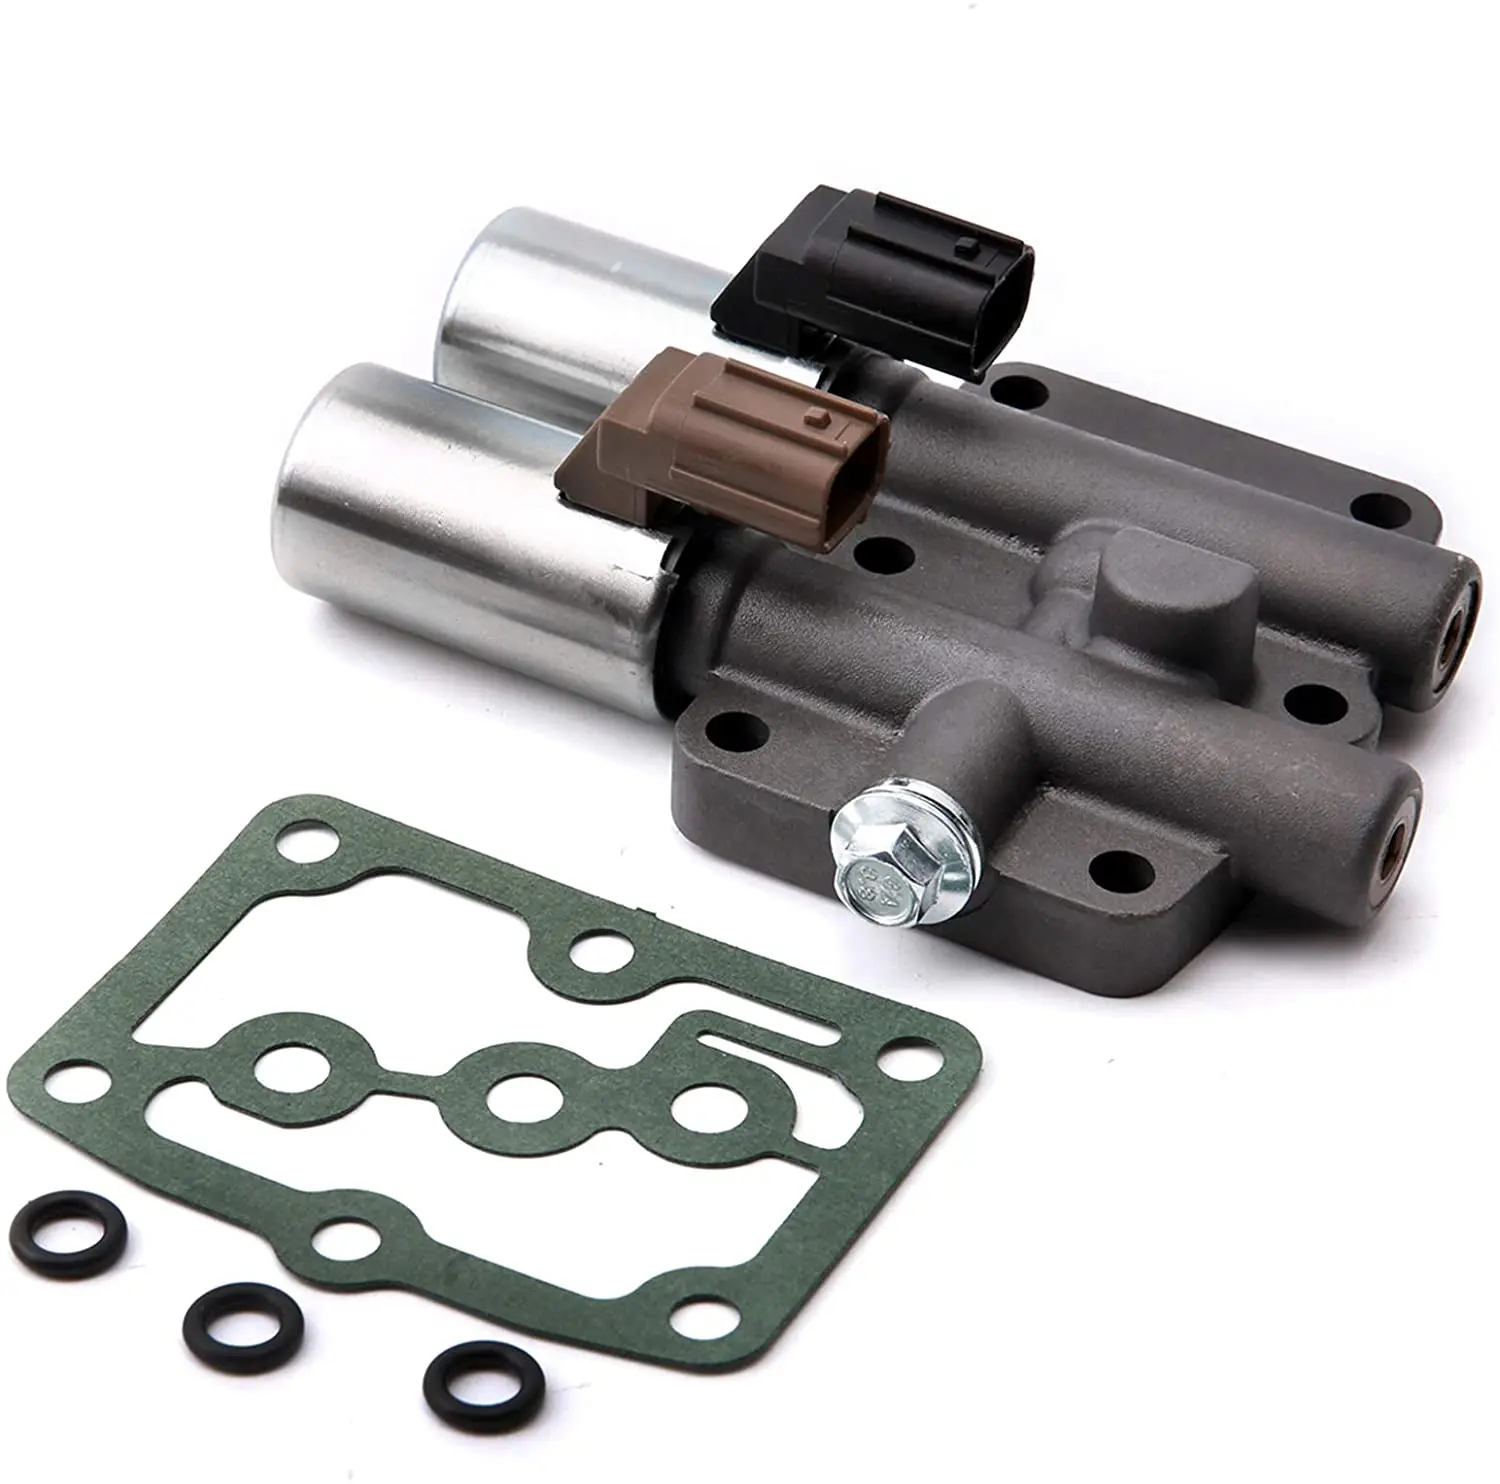 28250-P6H-024 Transmission Dual Linear Solenoid Compatible with Honda Accord Odyssey Acura CL TL MDX Pilot Prelude 28250P6H024 with 1PCS Gasket and 3PCS O-Rings 